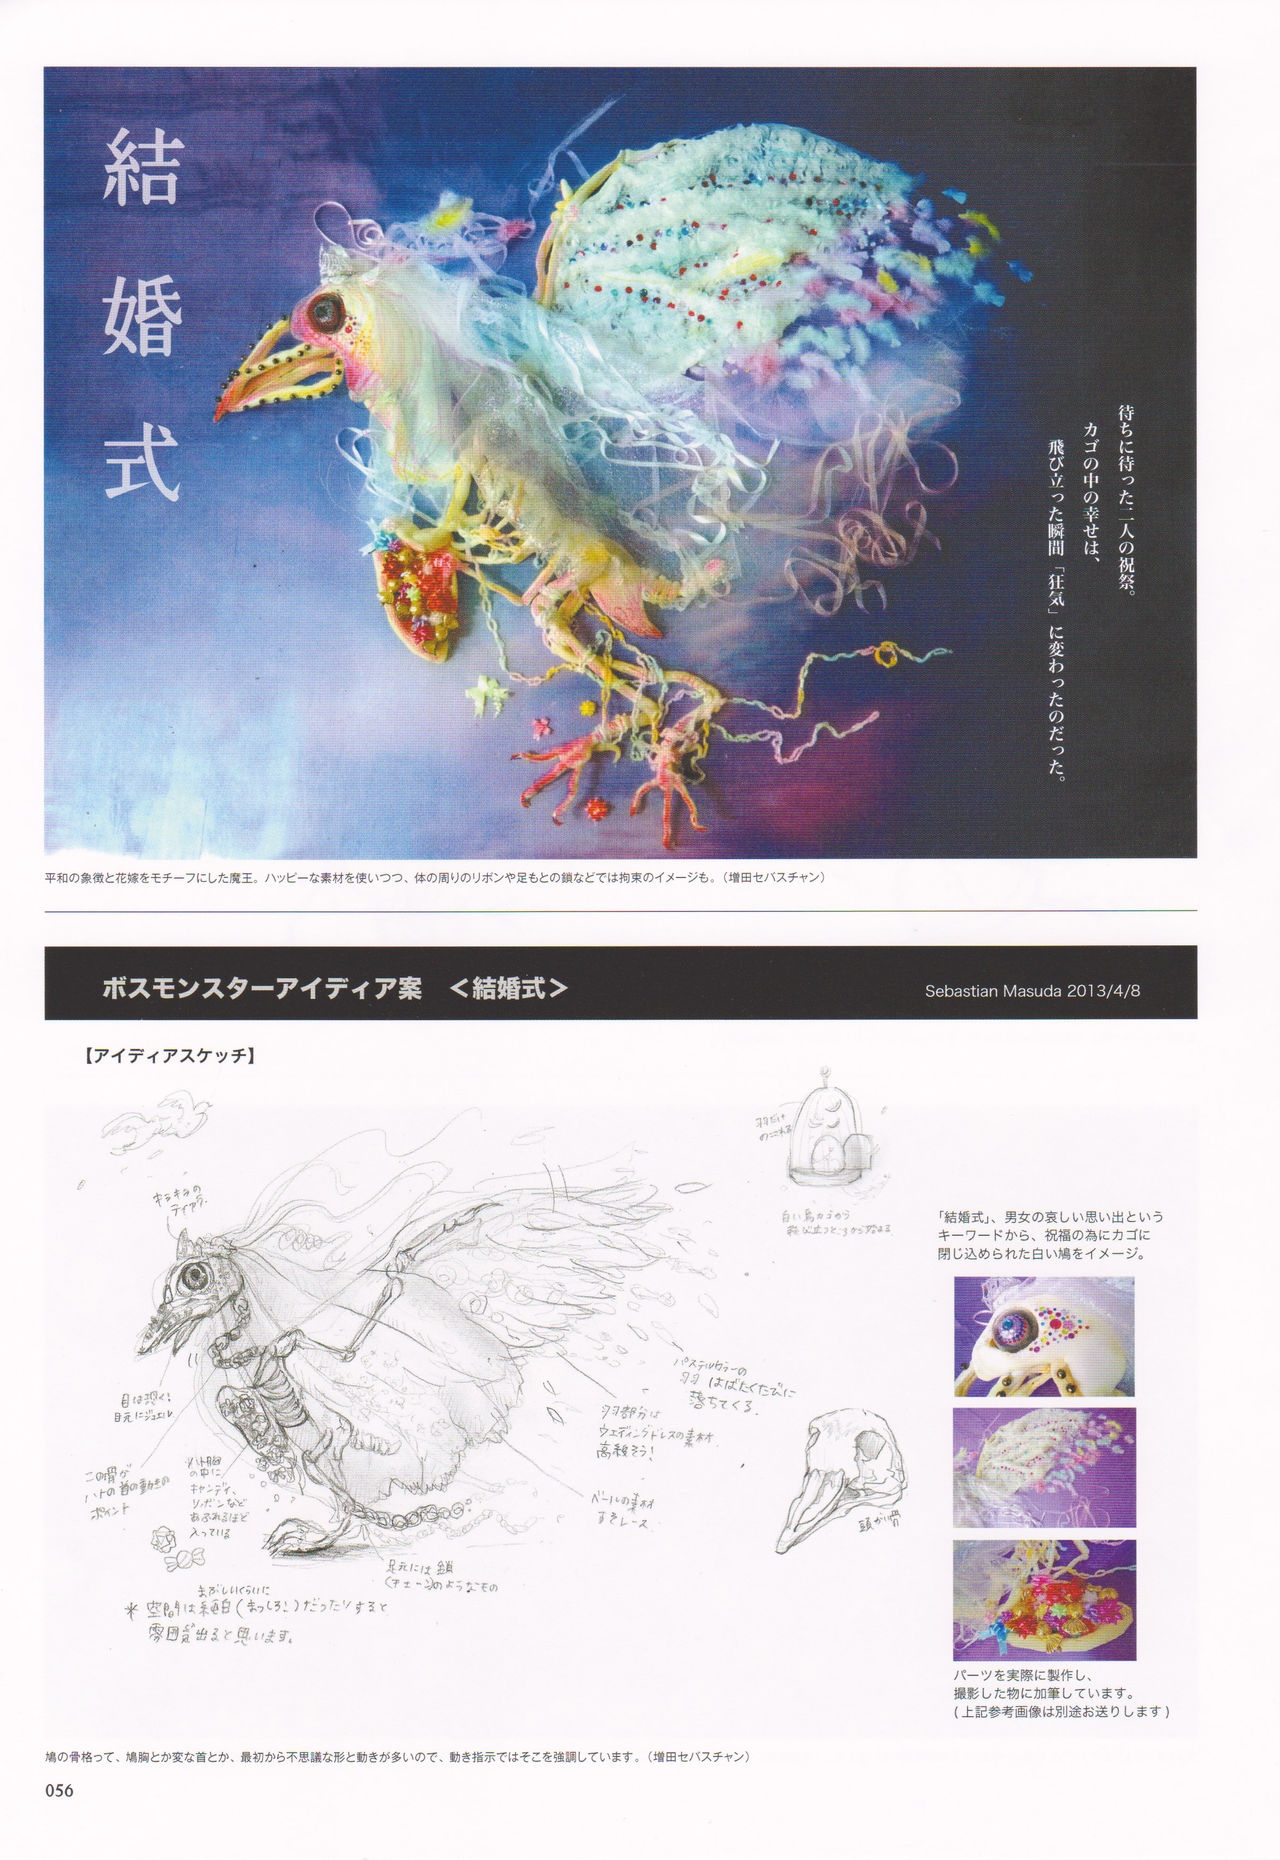 Bravely Second - End Layer - Design Works THE ART OF BRAVELY 2013-2015 56